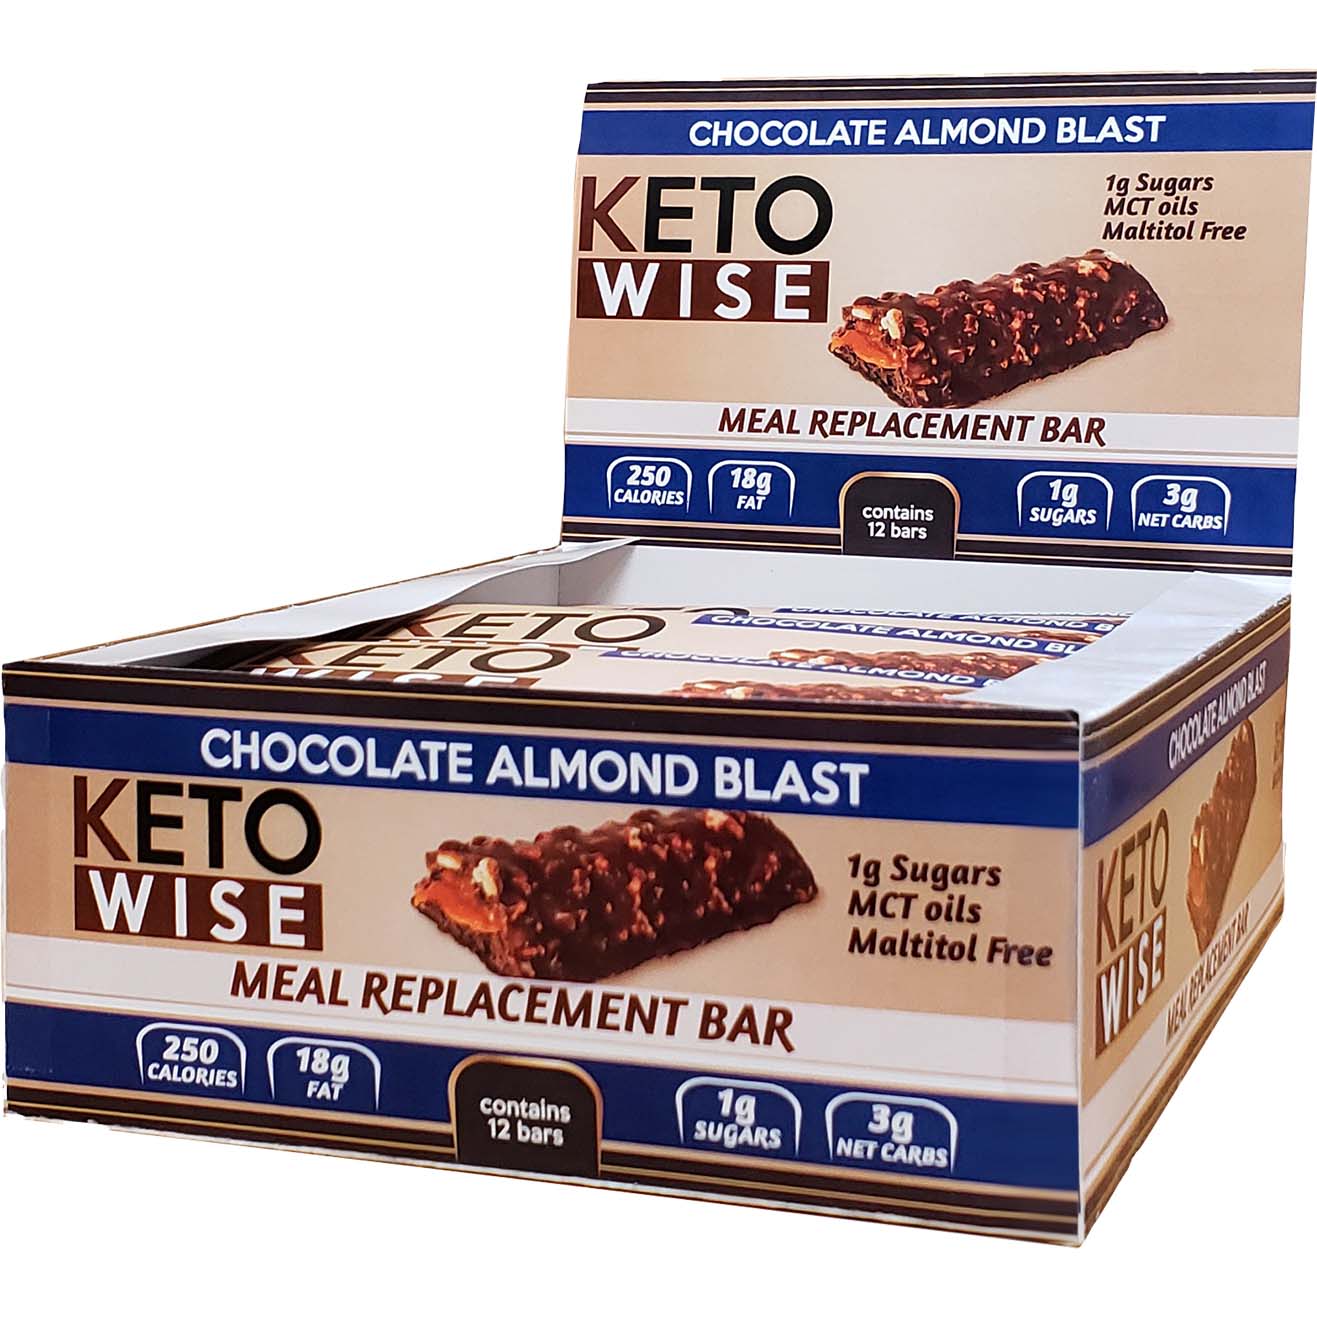 Keto Wise Meal Replacement Bar Box of 12 Bars Chocolate Almond Blast